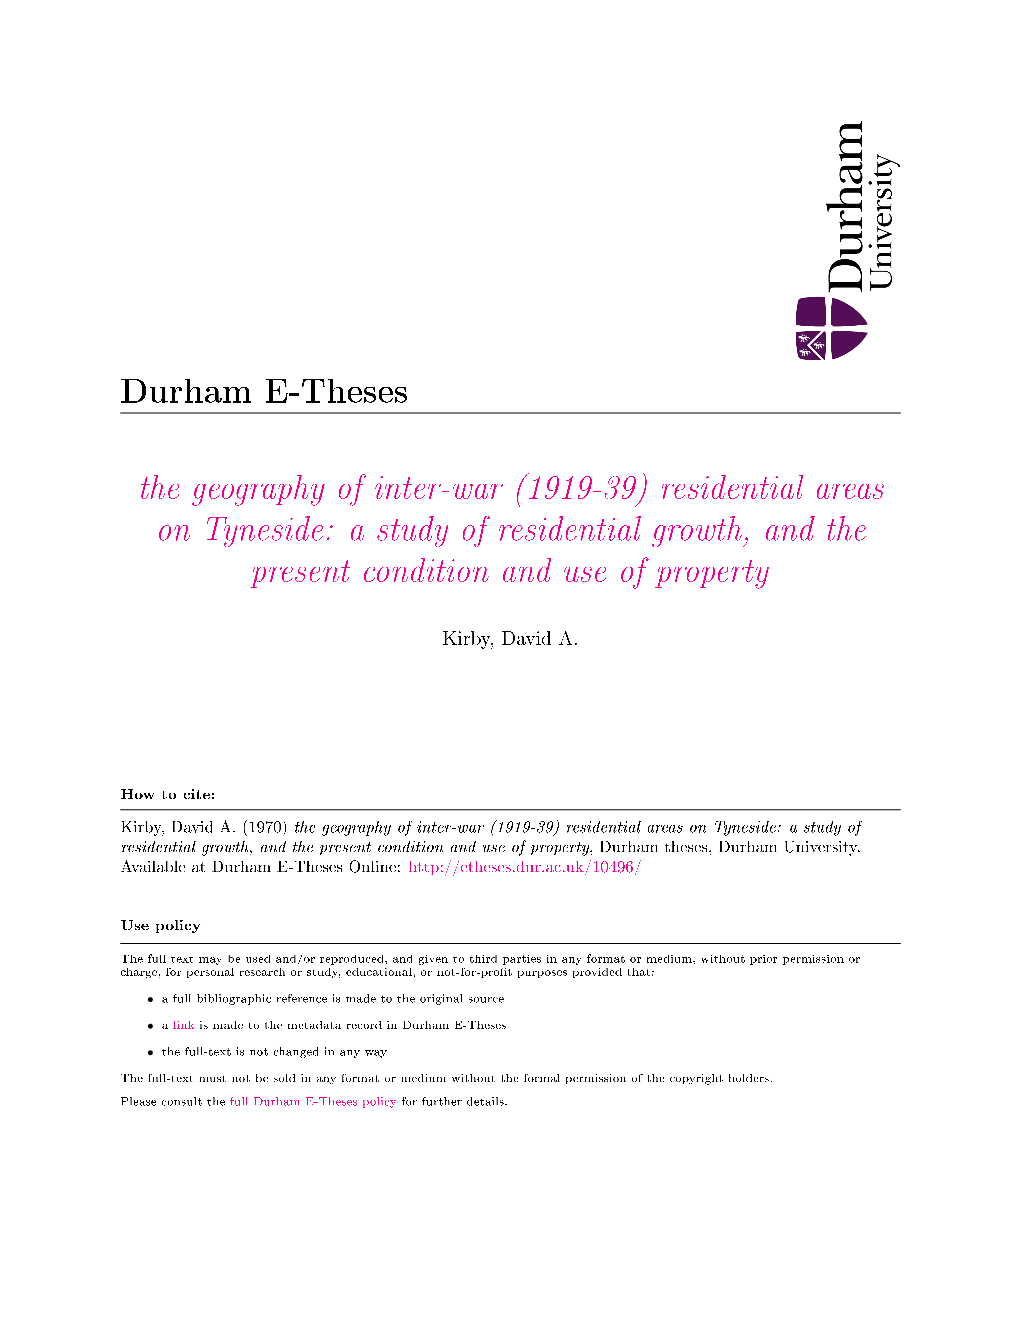 The Geography of Inter-War (1919-39) Residential Areas on Tyneside: a Study of Residential Growth, and the Present Condition and Use of Property